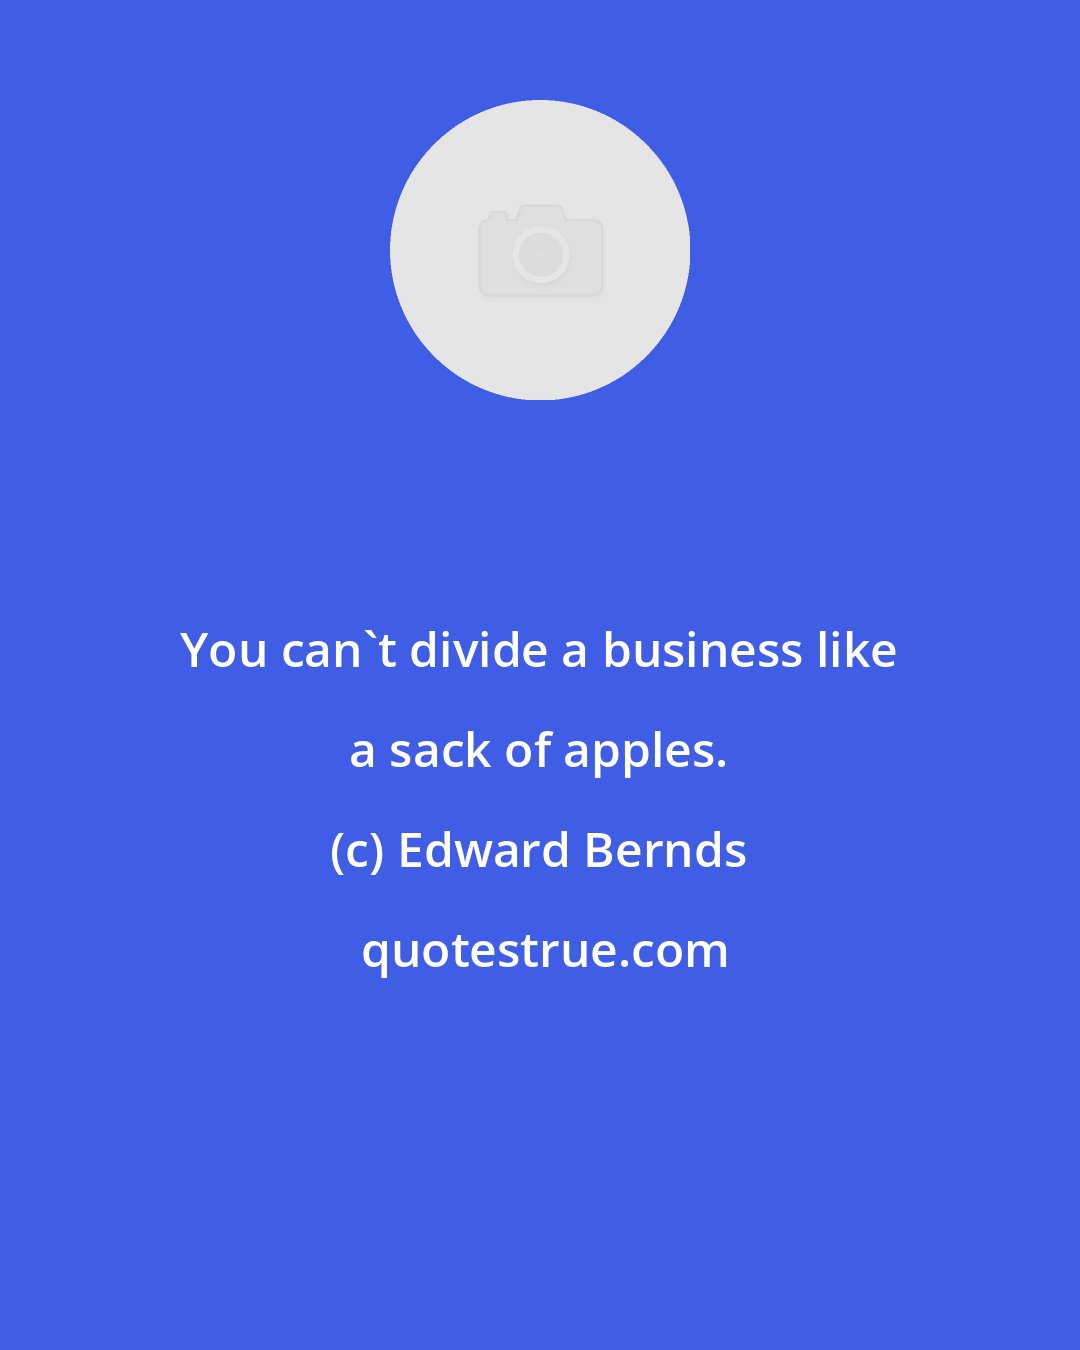 Edward Bernds: You can't divide a business like a sack of apples.